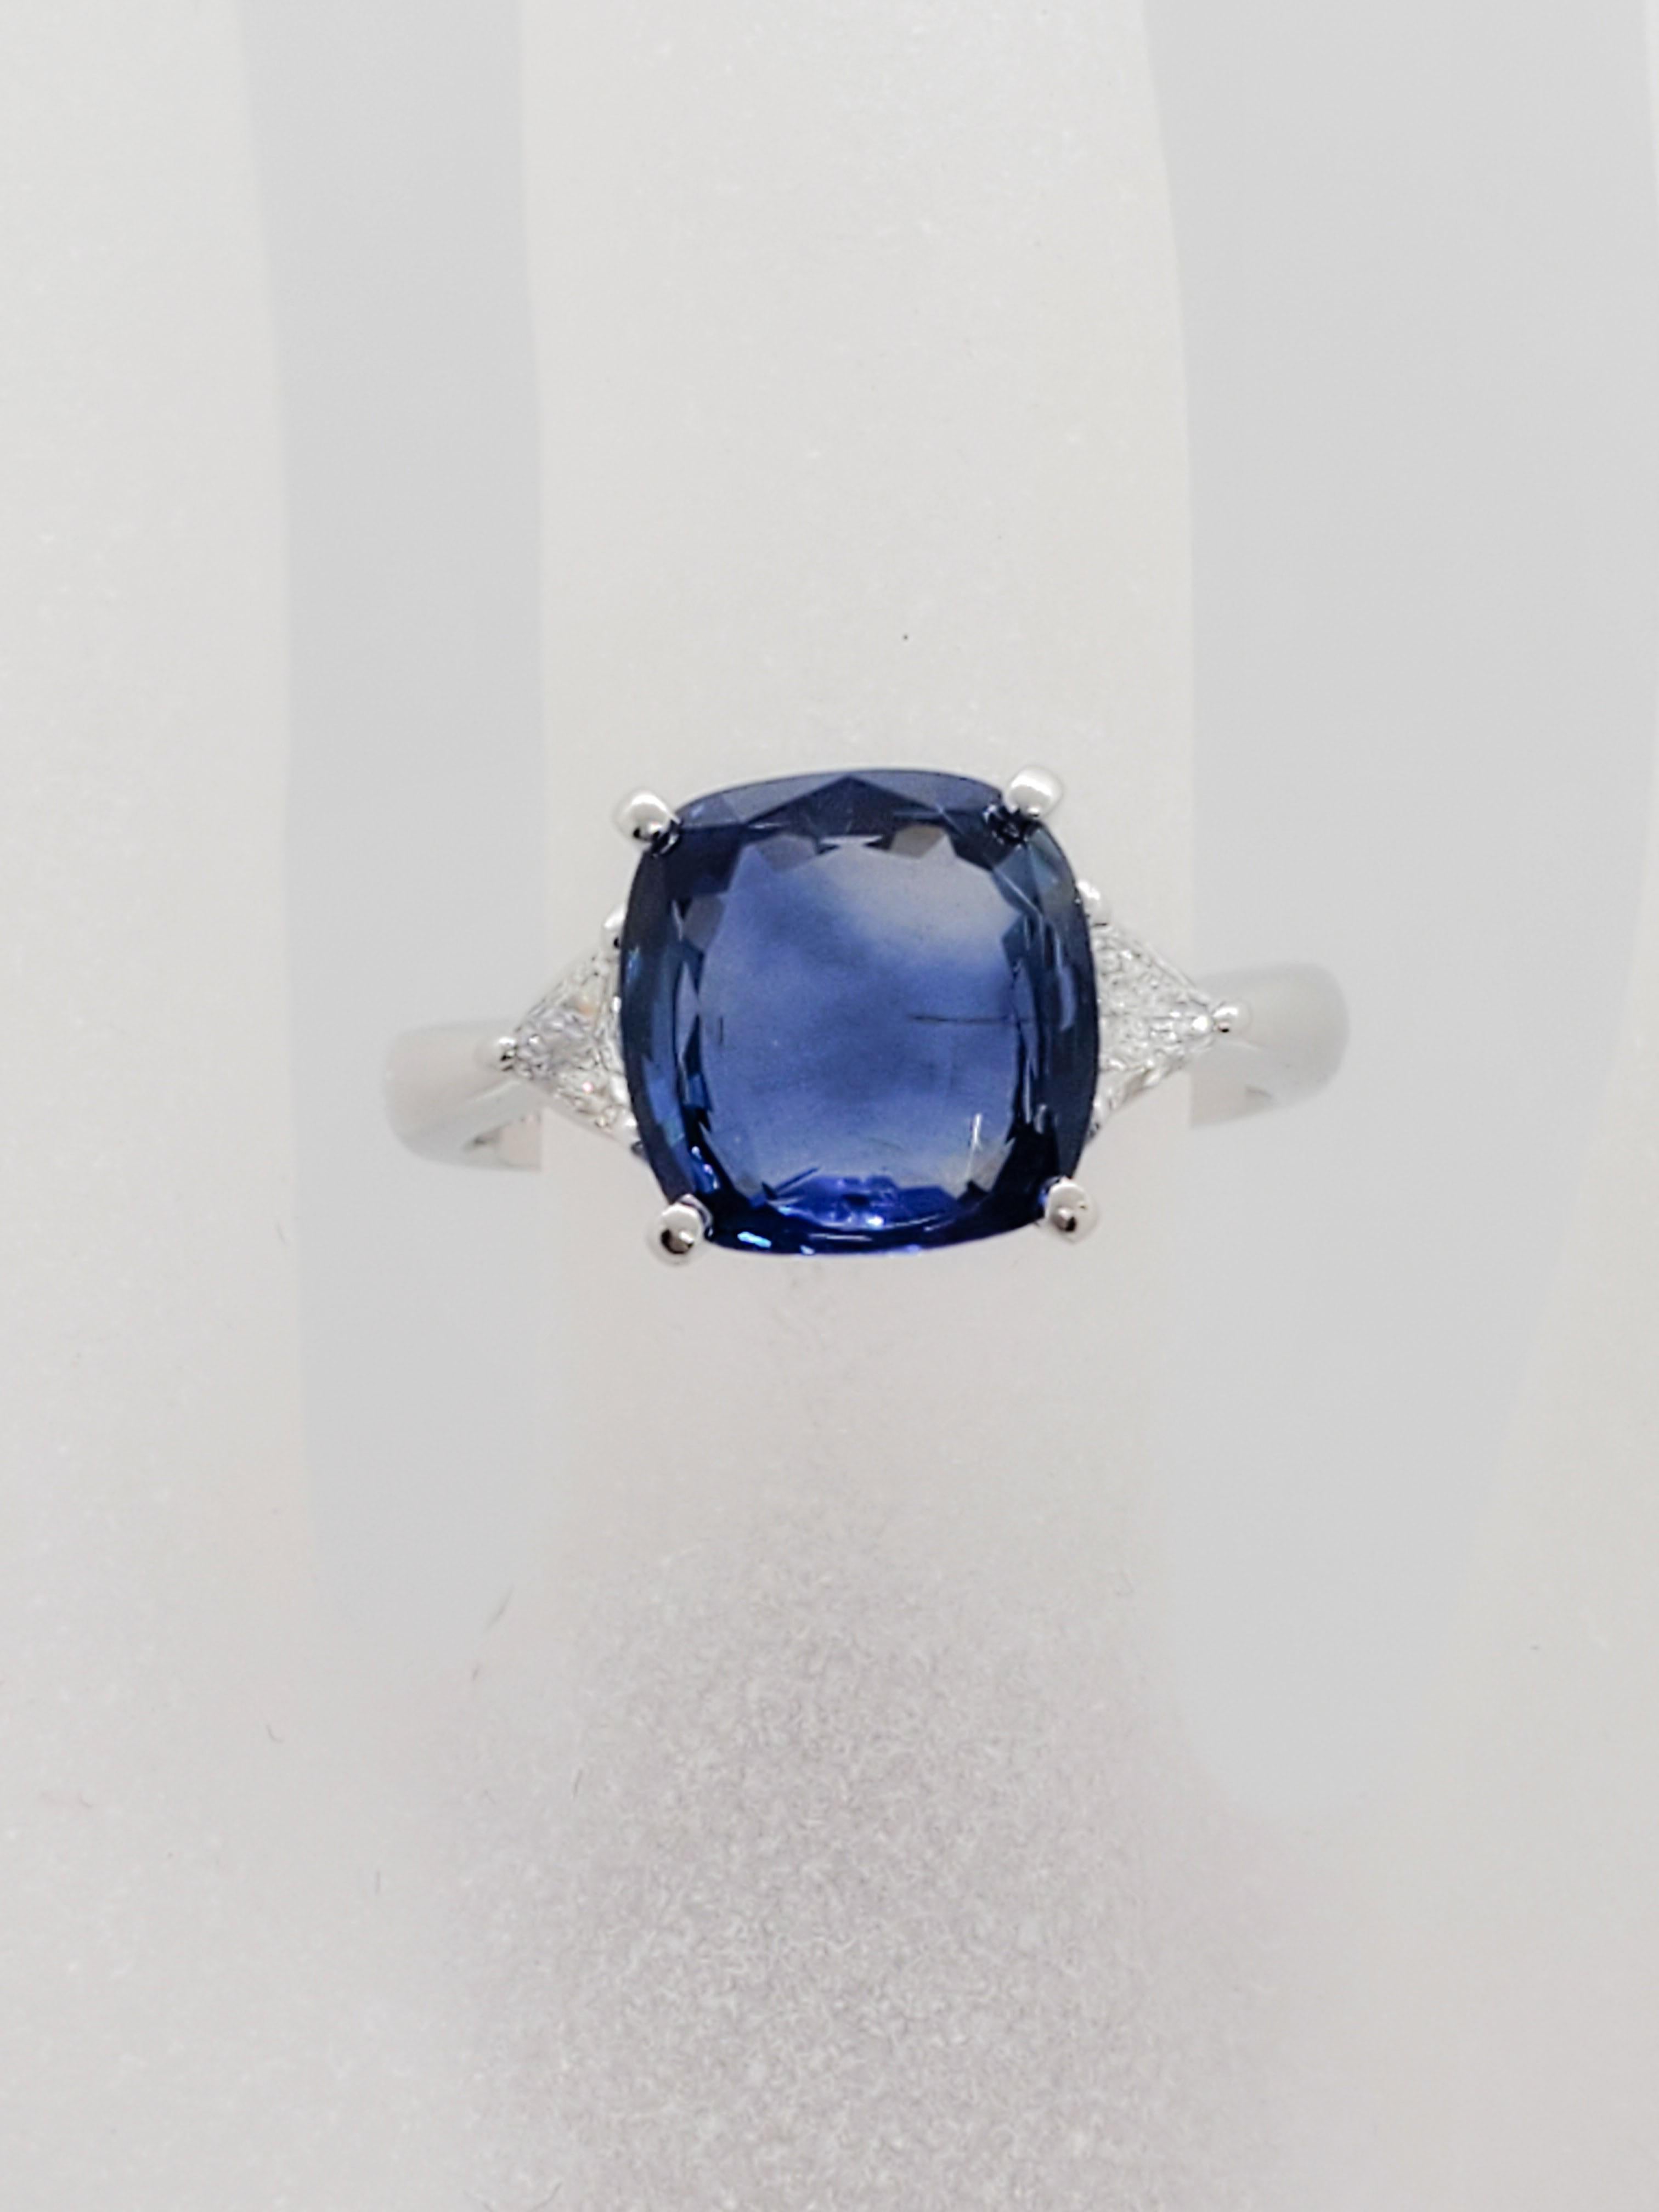 Gorgeous 4.44 ct blue sapphire square cushion that has a bright blue color and perfect shape. The diamond trillions weigh 0.26 ct and are good quality, white, and bright. Ring size is 5.5. Handmade mounting in platinum.